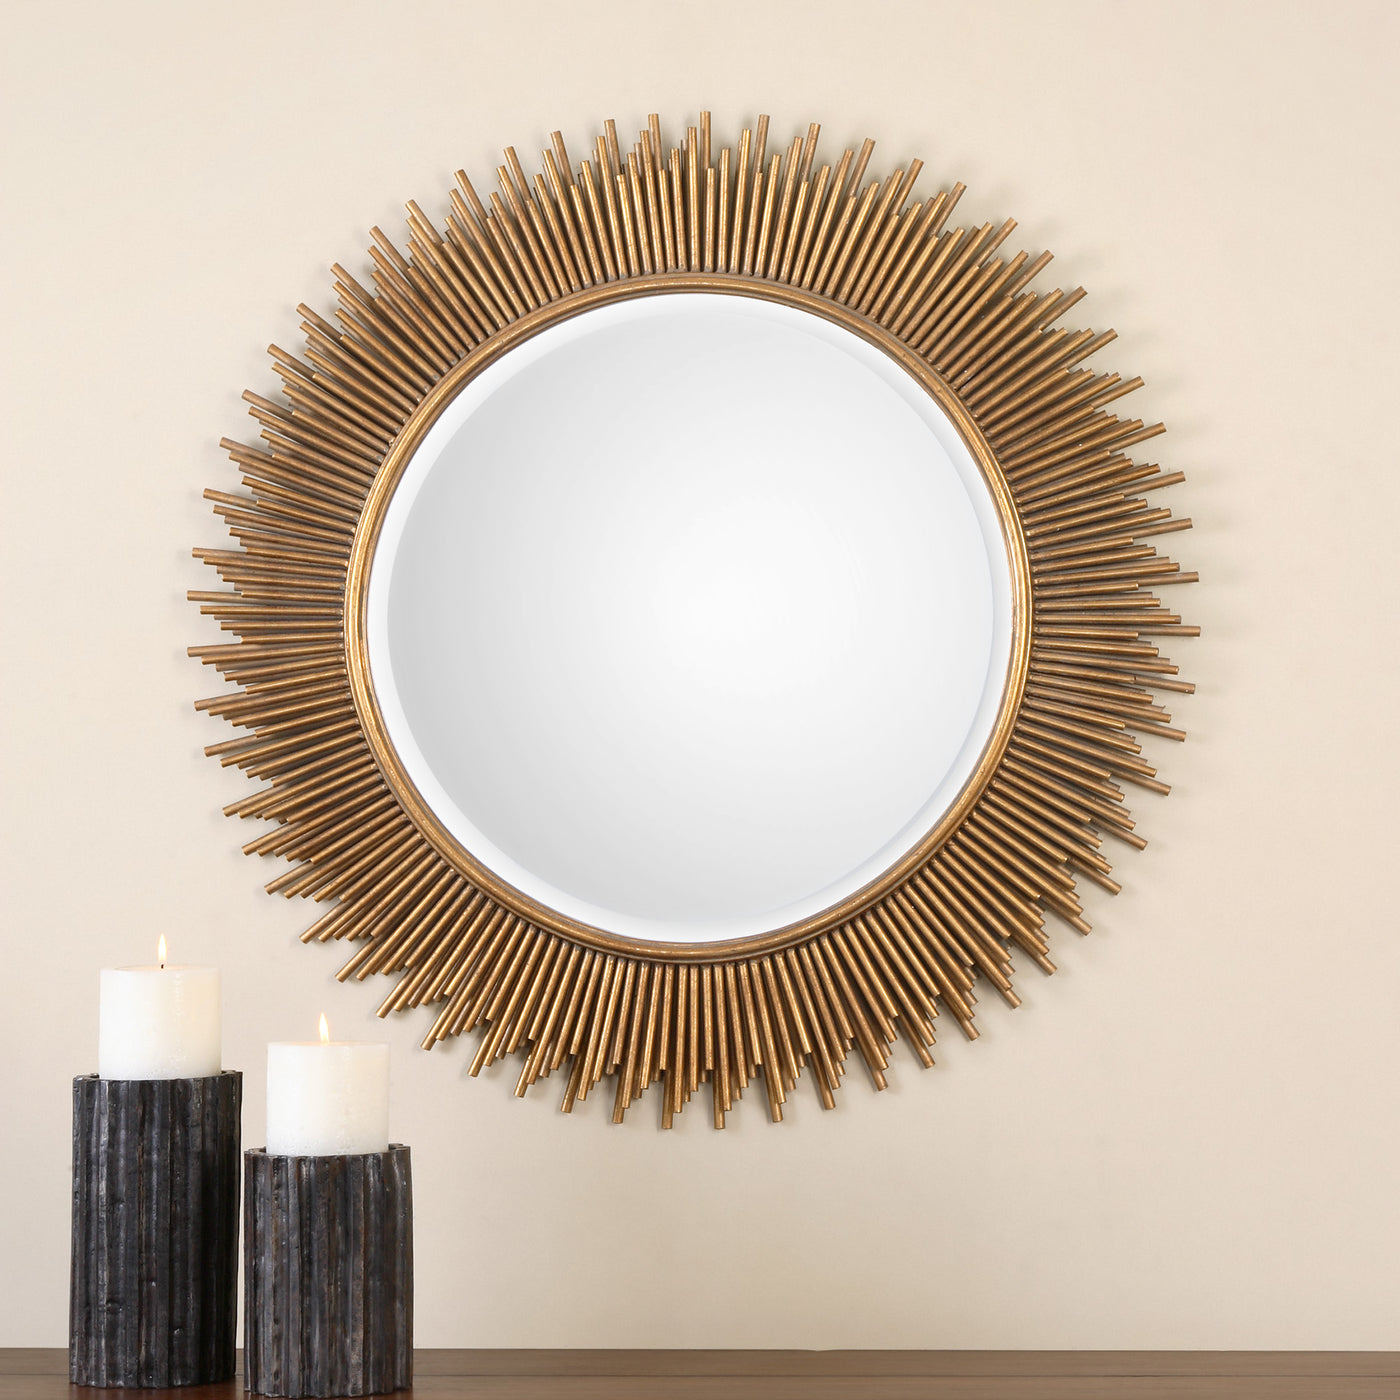 Frame Is Created Using Varying Lengths Of Metal Tubes Finished In An Antiqued Gold Leaf. Mirror Has A Generous 1 1/4" Bevel.